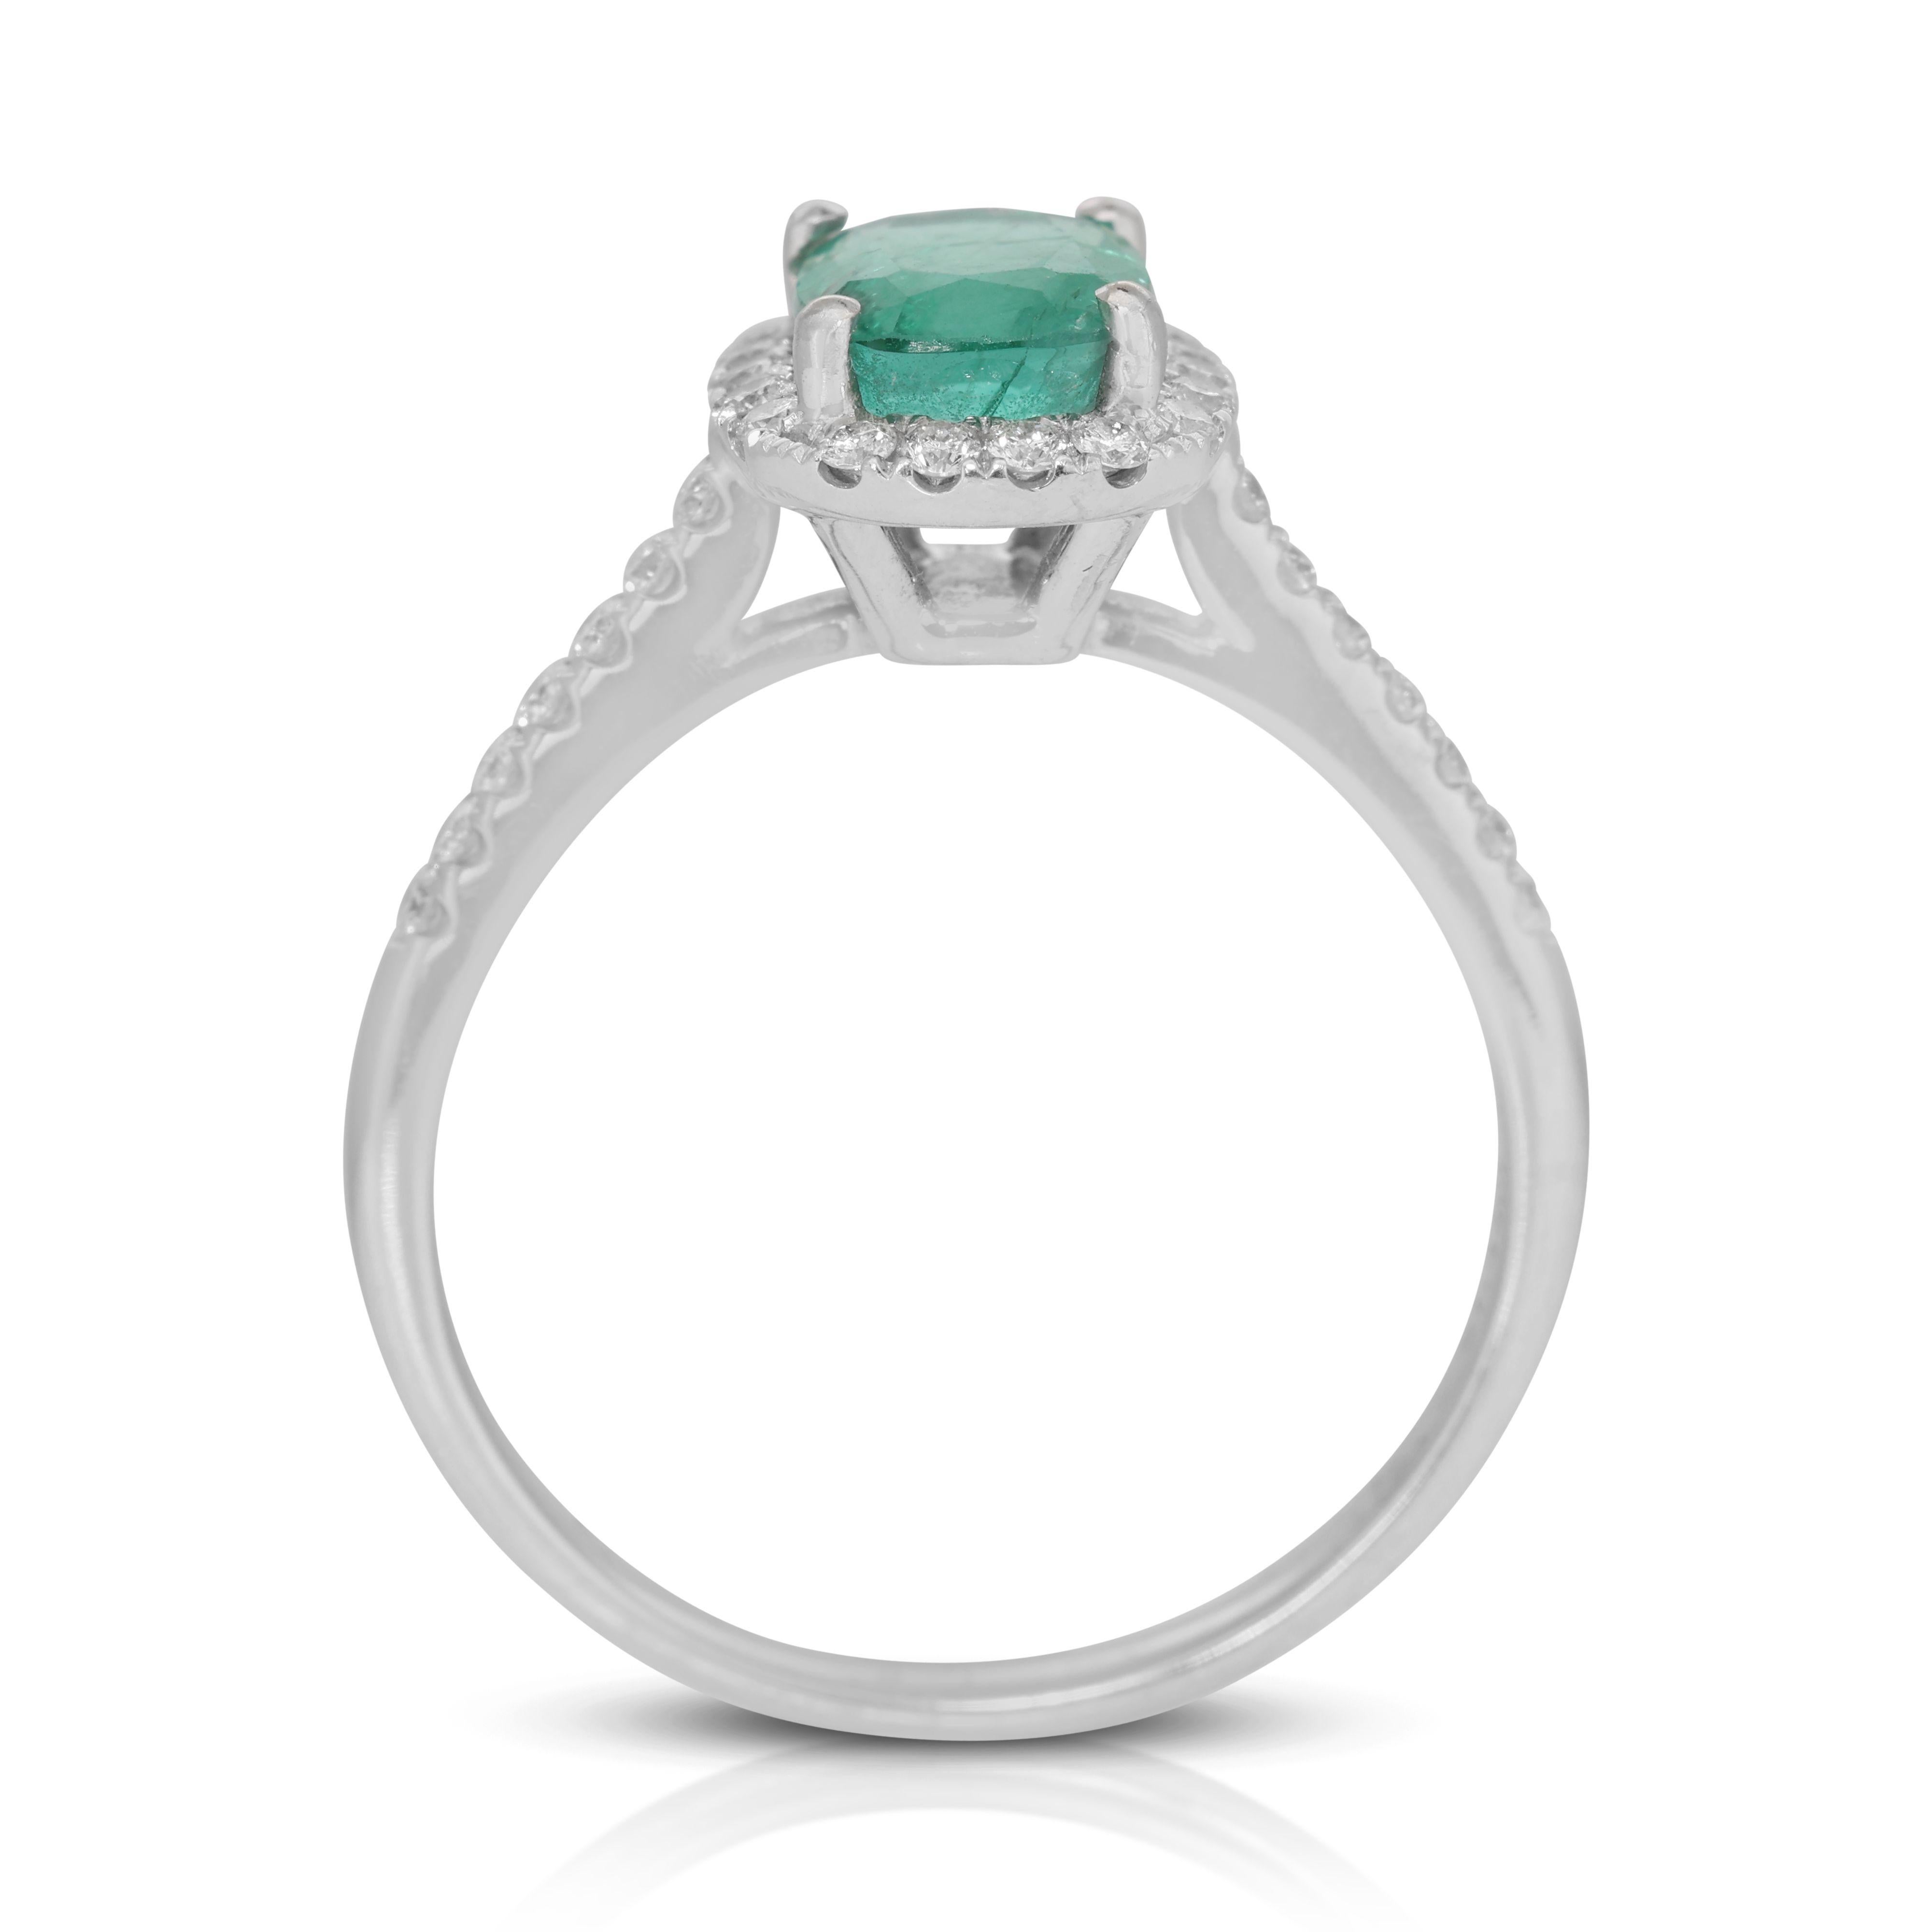 Captivating 0.69ct Emerald Ring with 0.29ct Diamond Side Stones For Sale 1